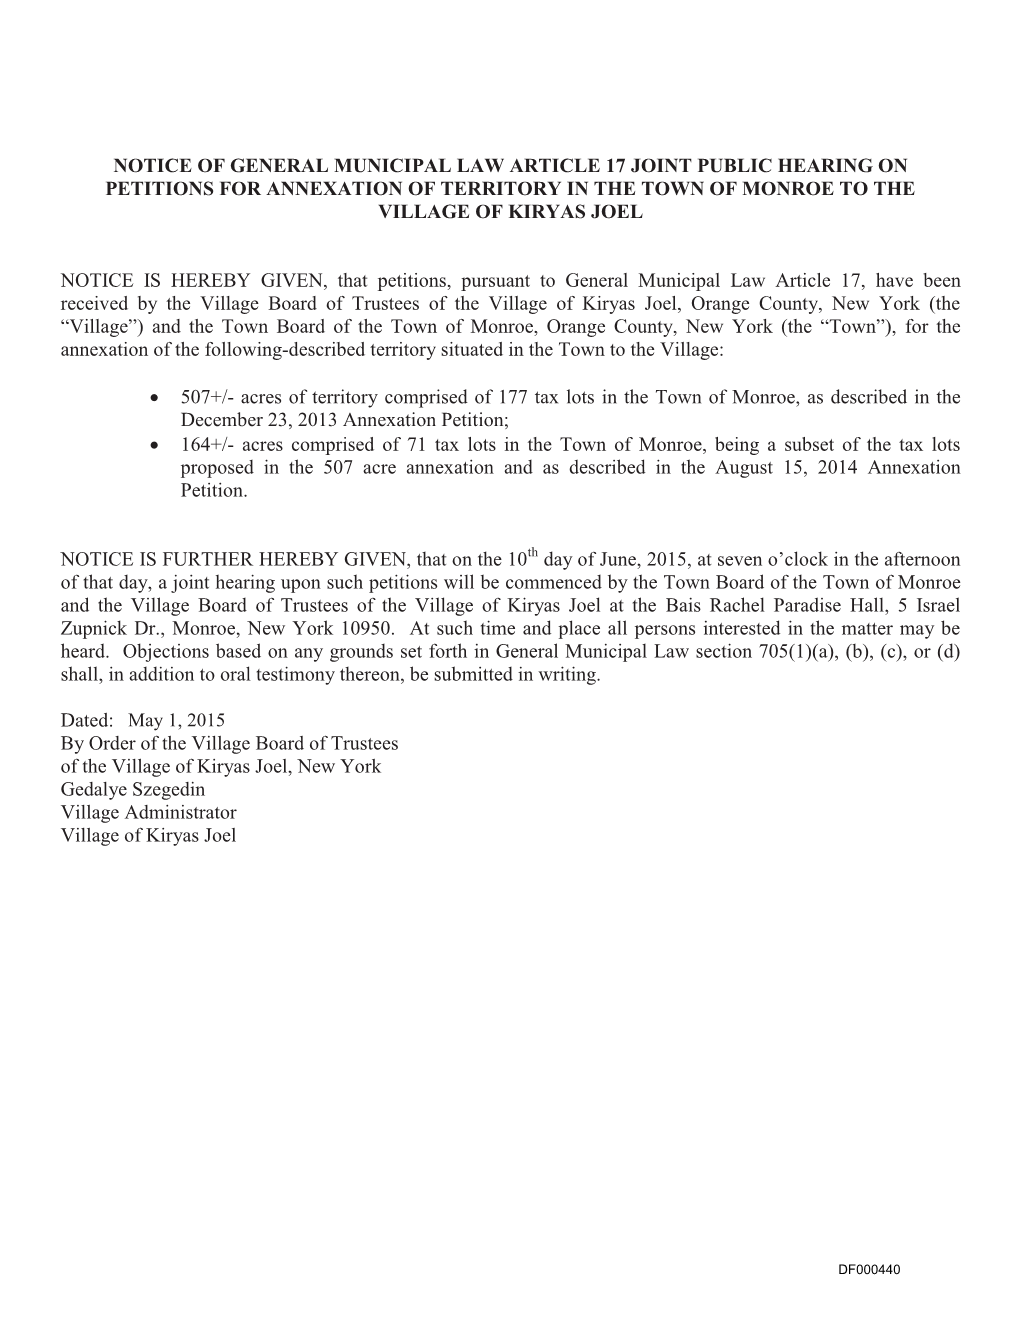 Notice of General Municipal Law Article 17 Joint Public Hearing on Petitions for Annexation of Territory in the Town of Monroe to the Village of Kiryas Joel